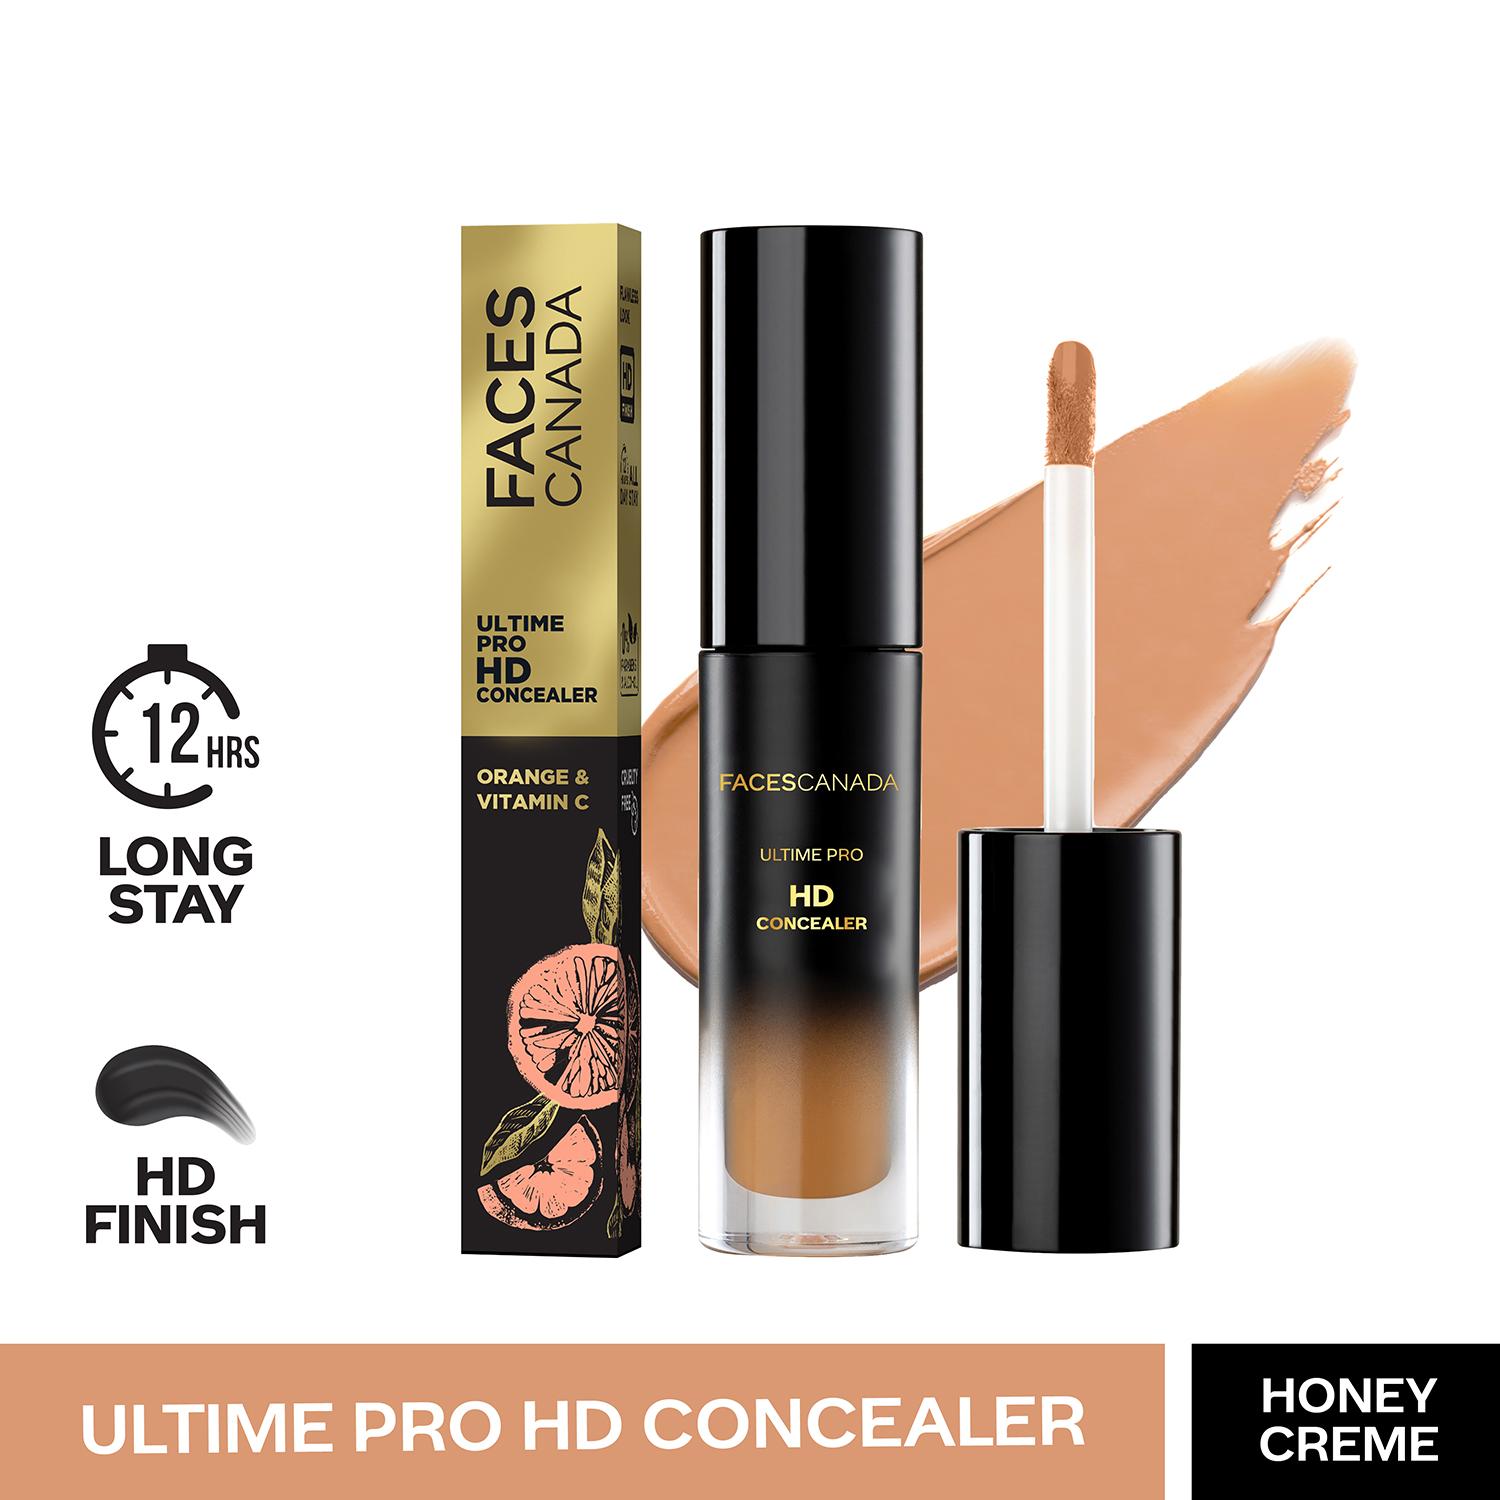 Faces Canada | Faces Canada Ultime Pro HD Concealer - Honey Creme 02, Natural Matte Finish (3.8 ml)